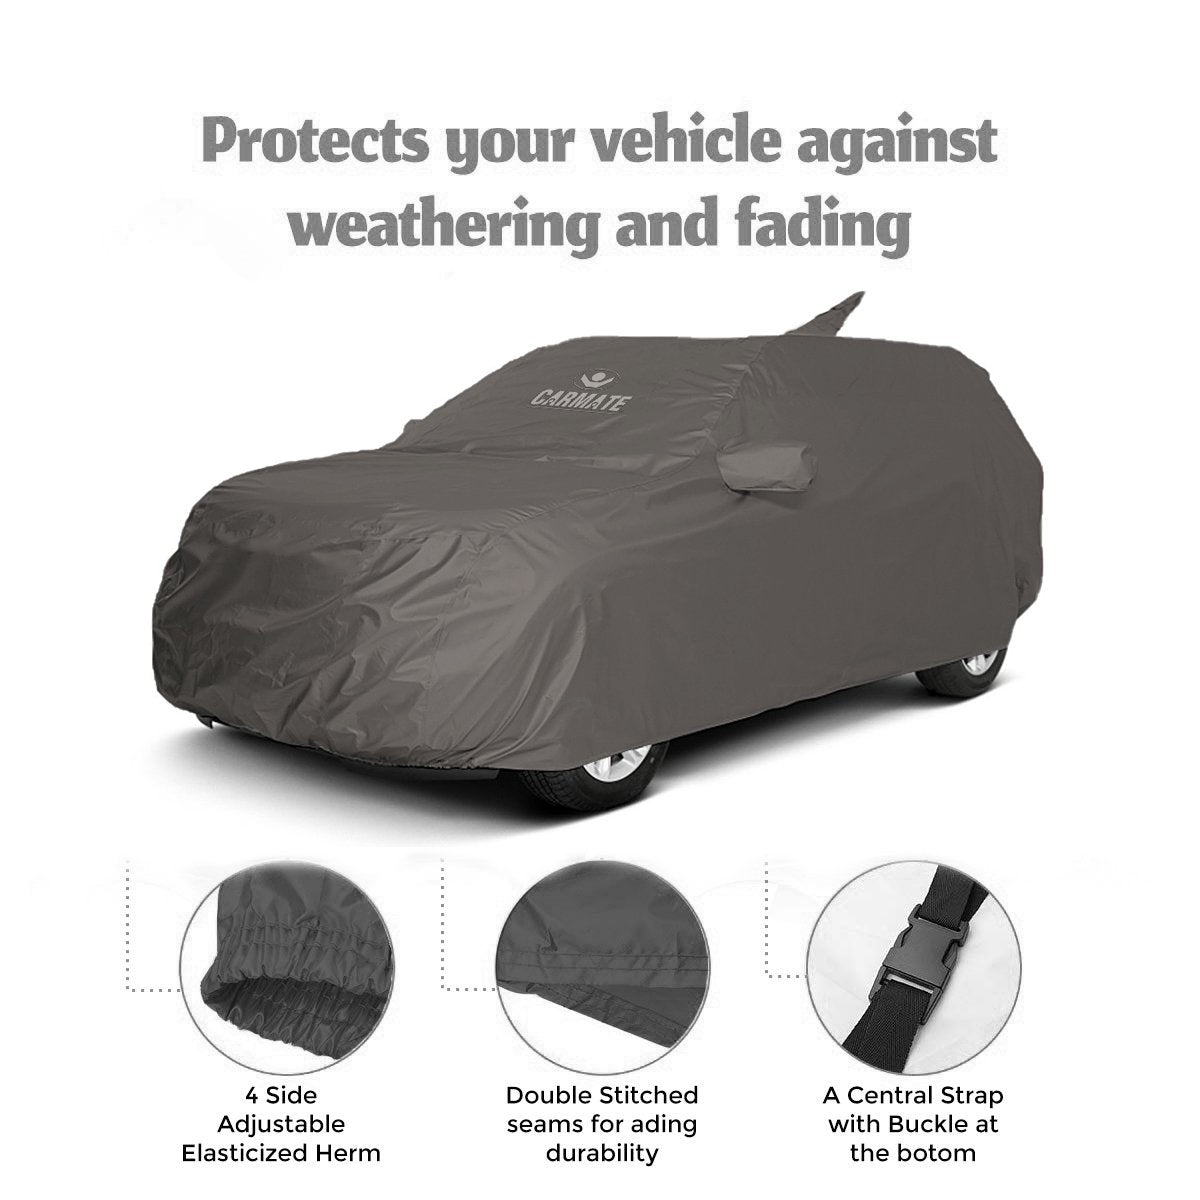 Carmate Car Body Cover 100% Waterproof Pride (Grey) for Ford - Ecosport - CARMATE®